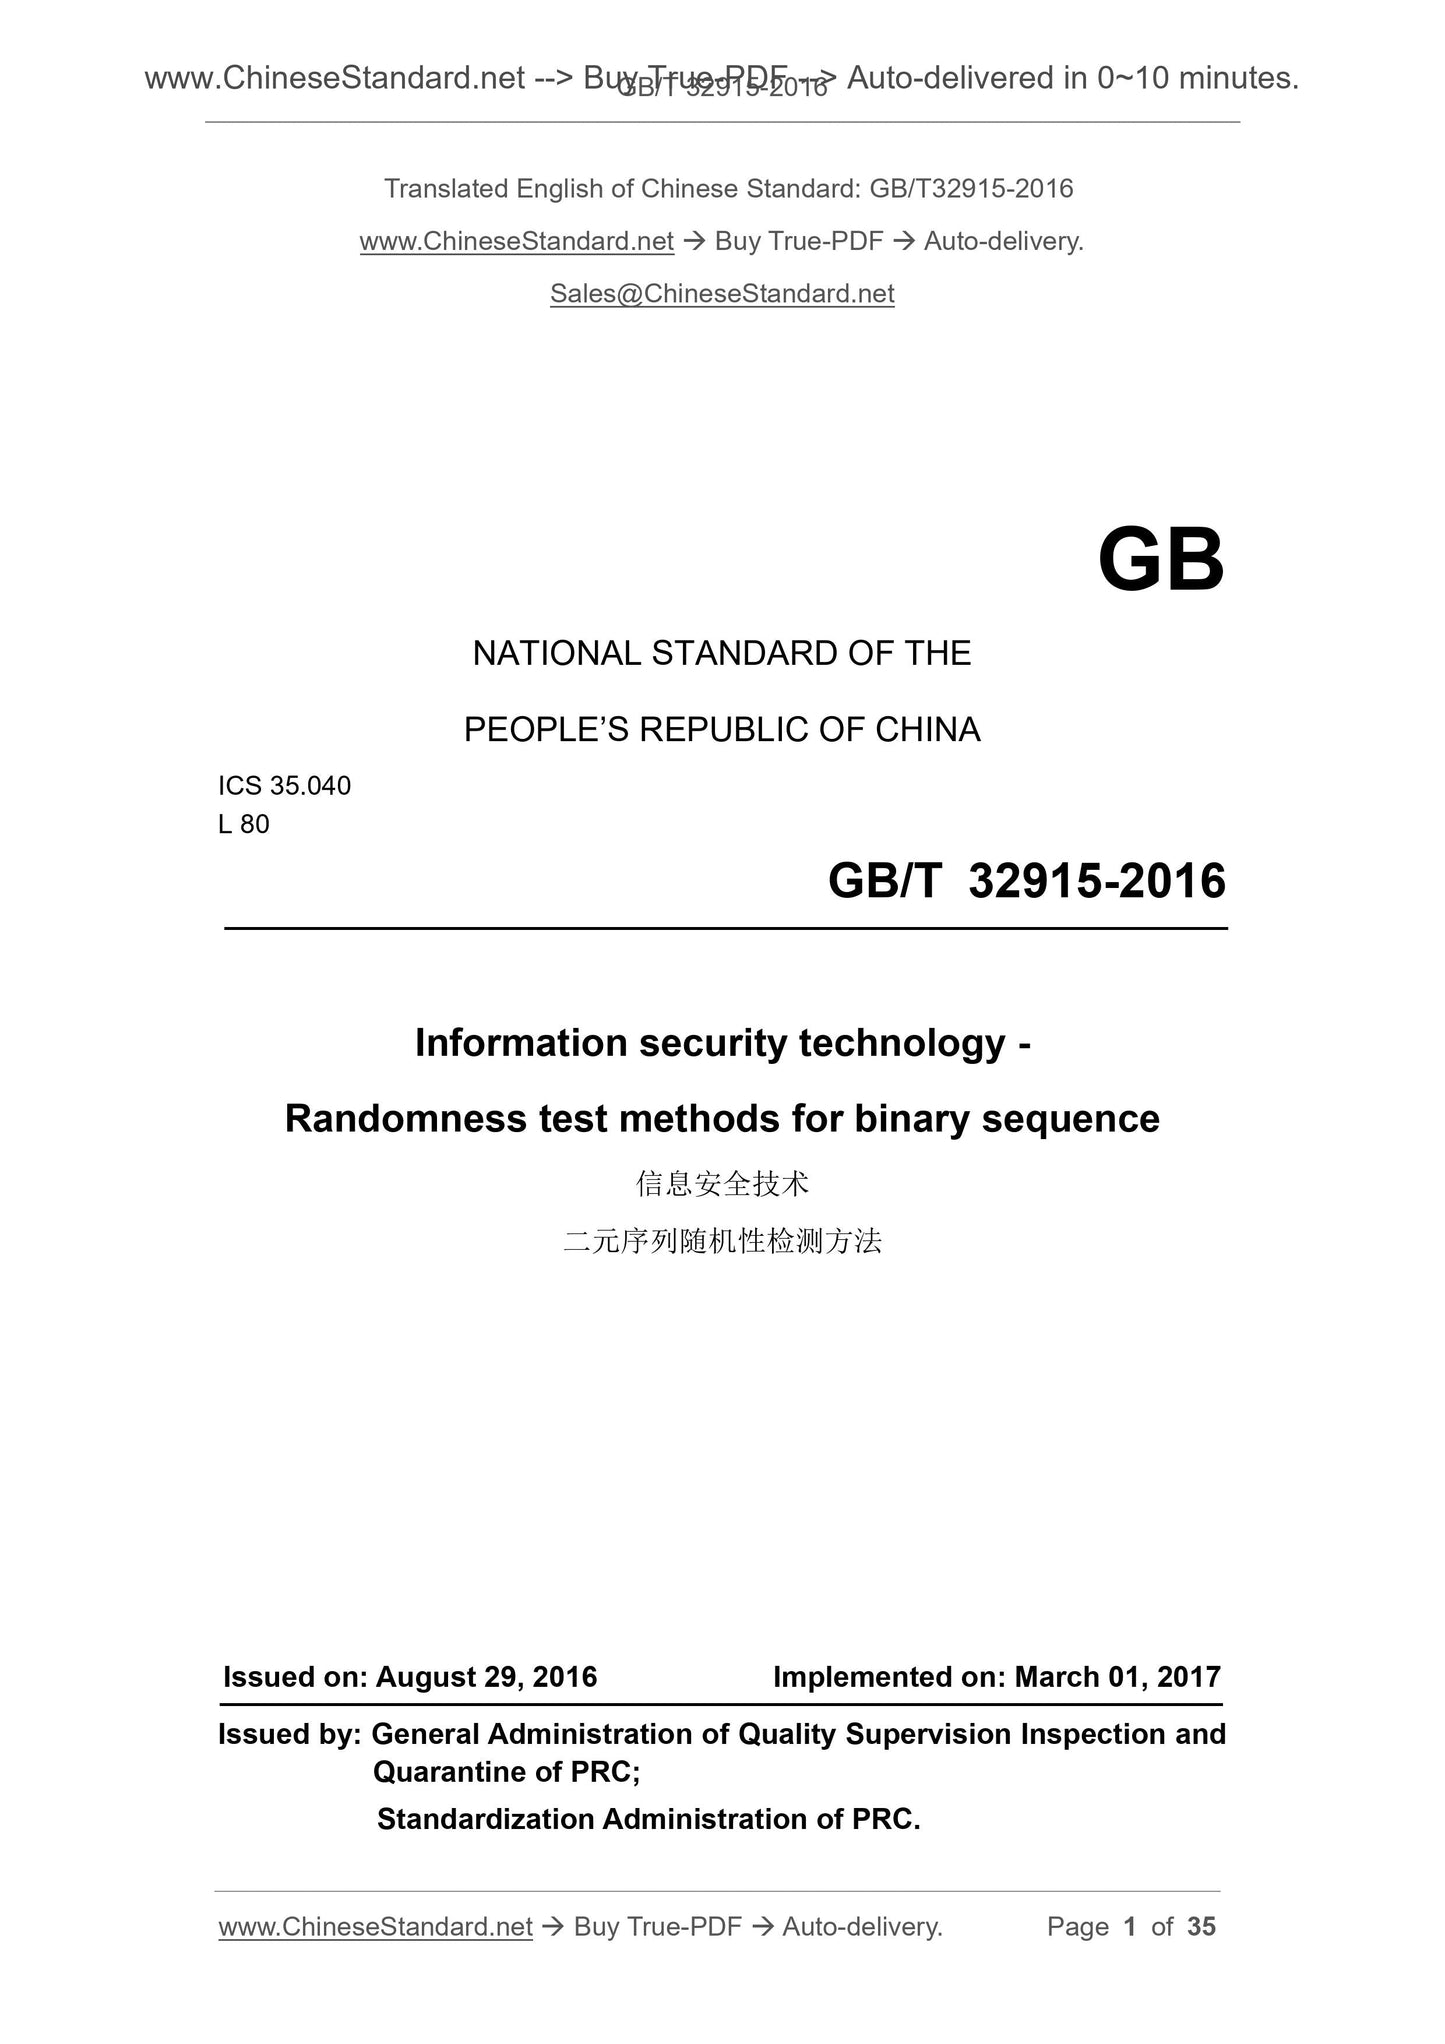 GB/T 32915-2016 Page 1